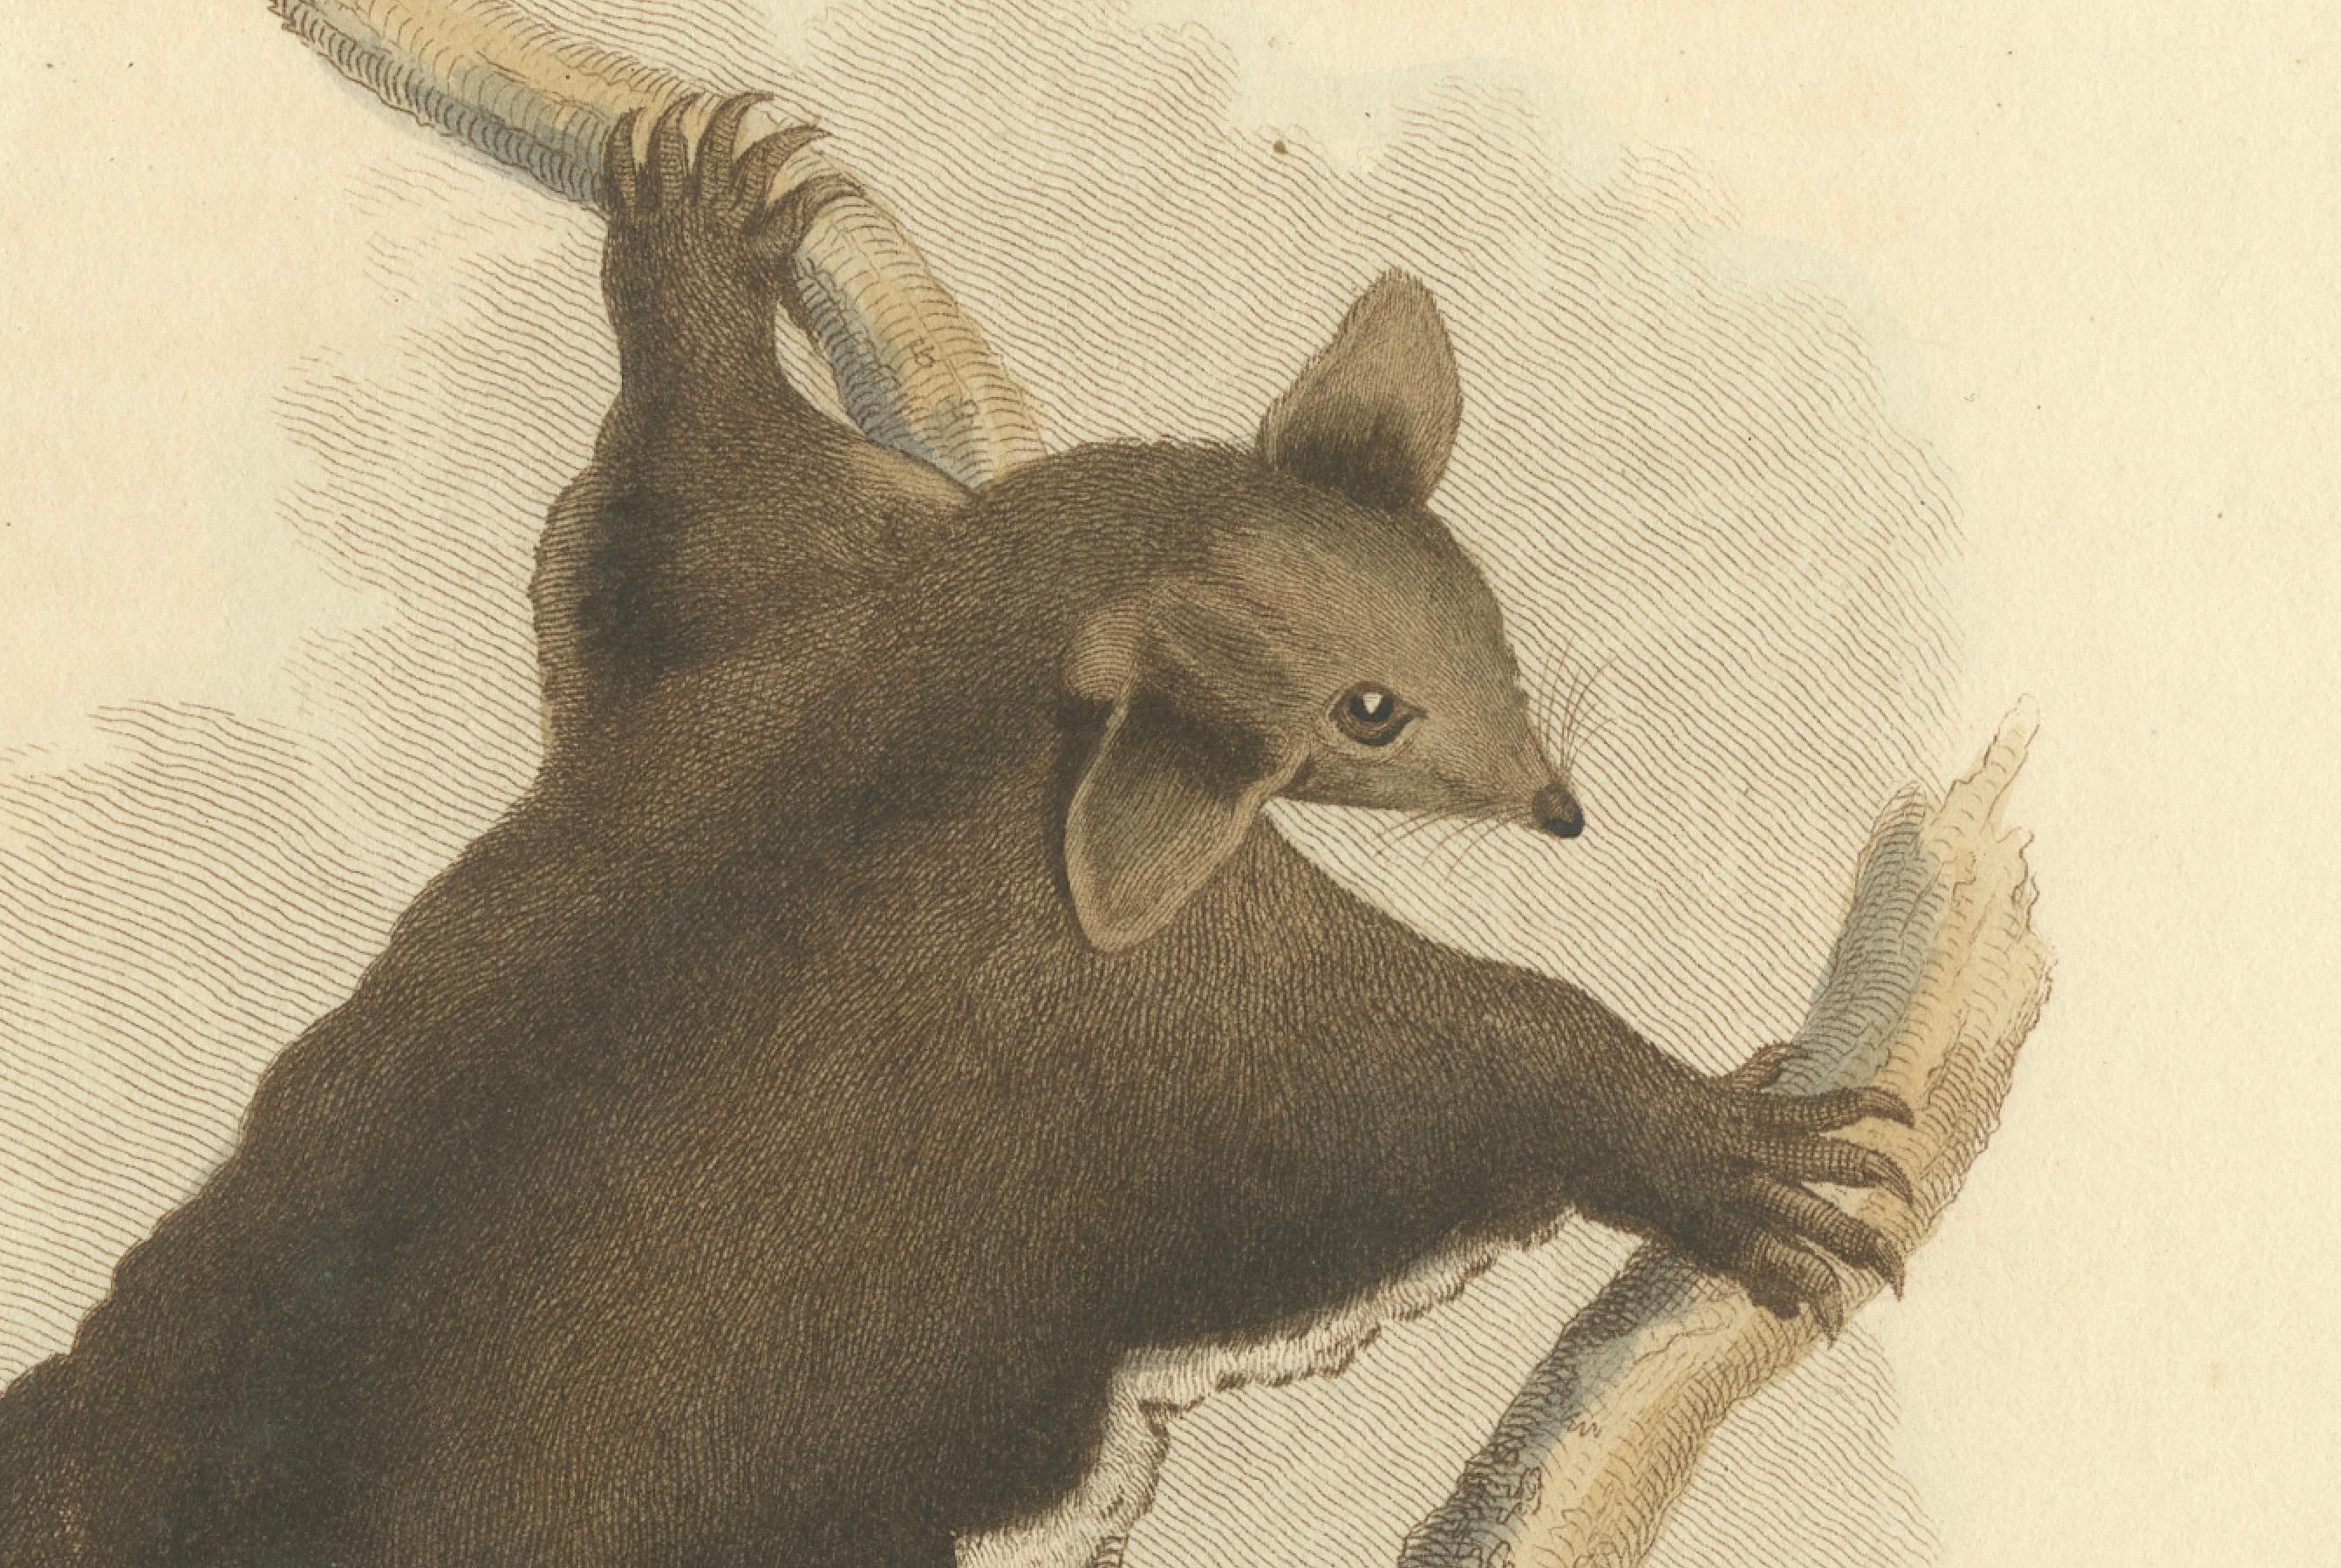 The animal depicted in the image is identified in the title as 'The greater flying phalanger, didelphis petaurus'. However, there seems to be a mix-up in the scientific name given. The term 